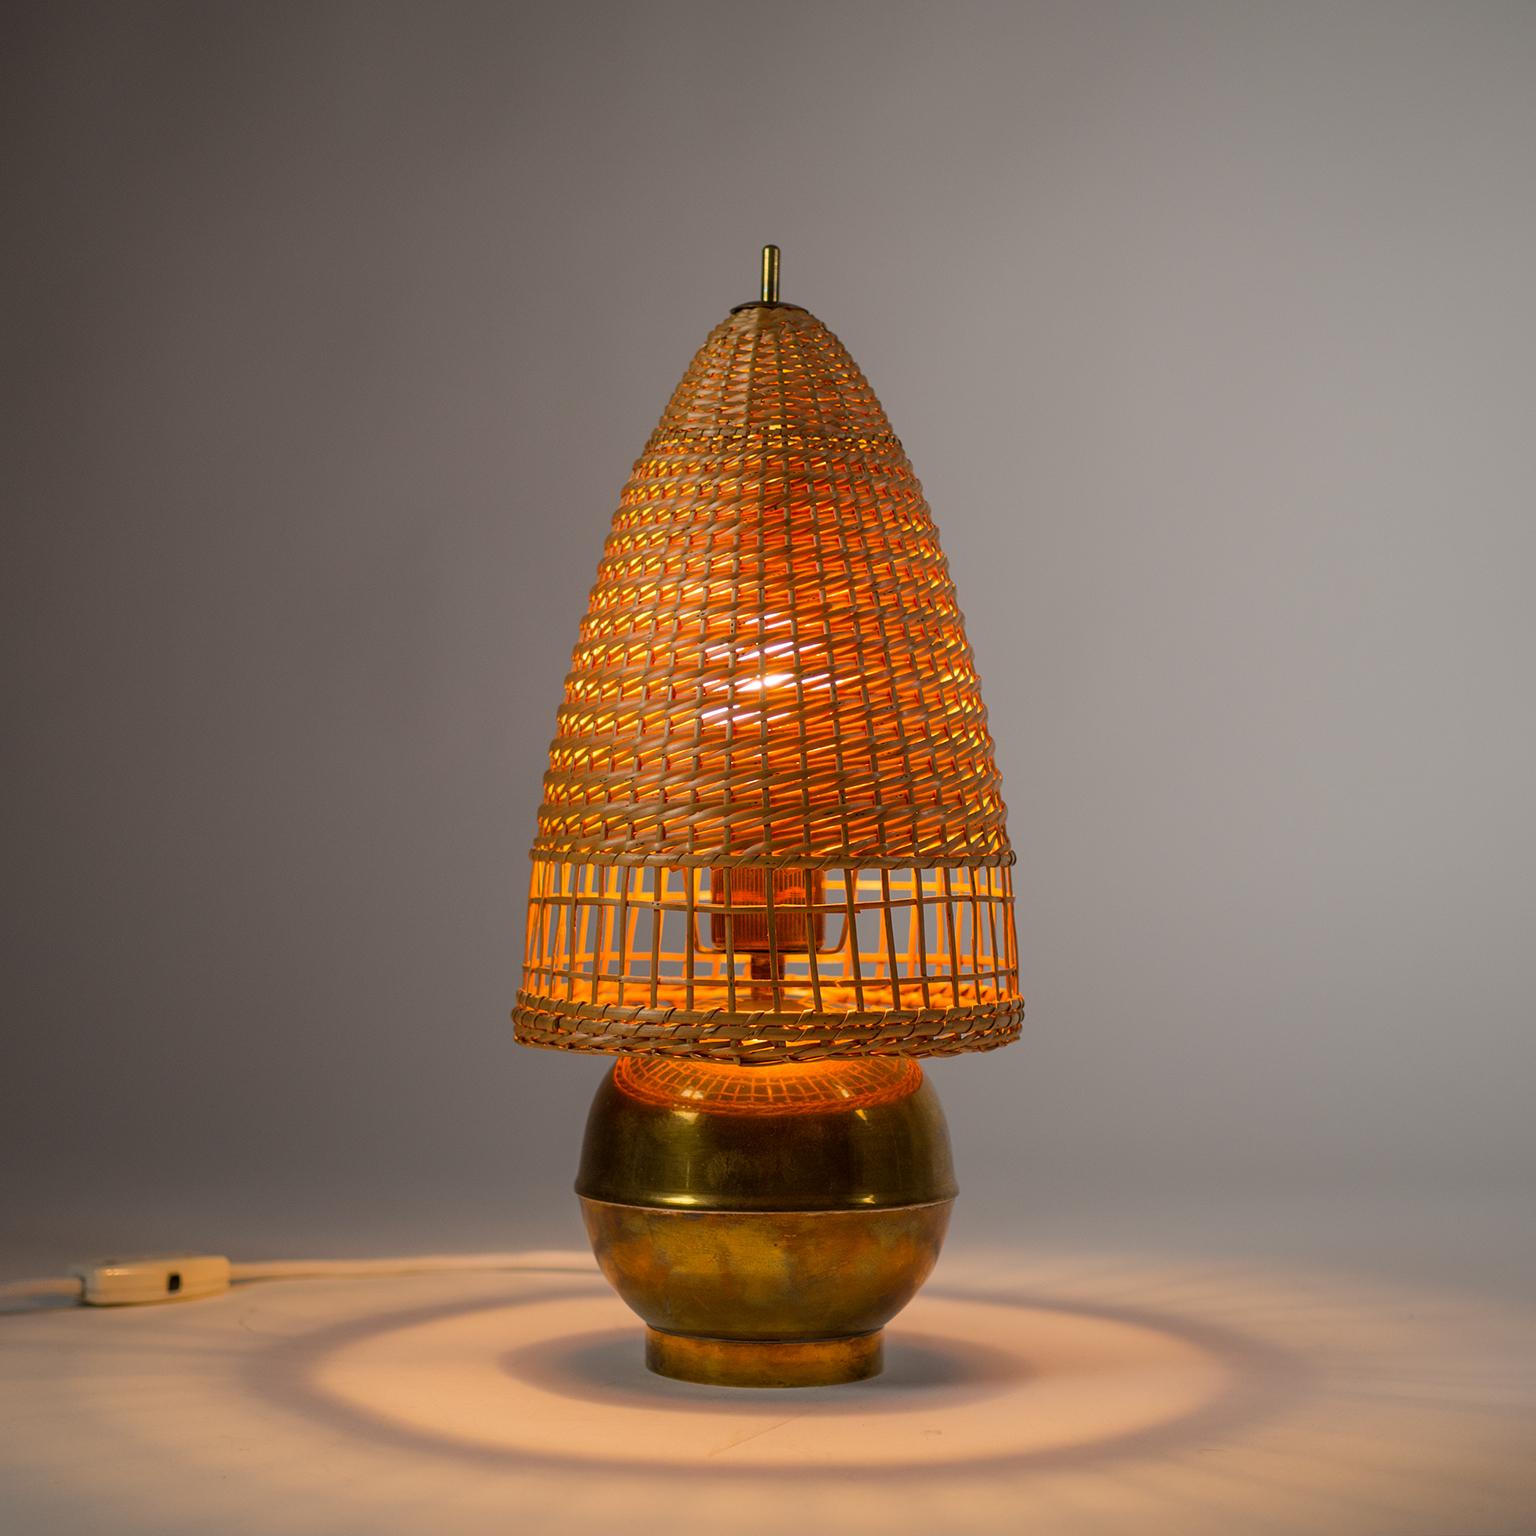 Delightful Art Deco table lamp from the 1940s in brass with a rare slender wicker shade. Very nice original condition and casts a lovely warm and indirect light effect. One original bakelite E27 socket with new wiring.